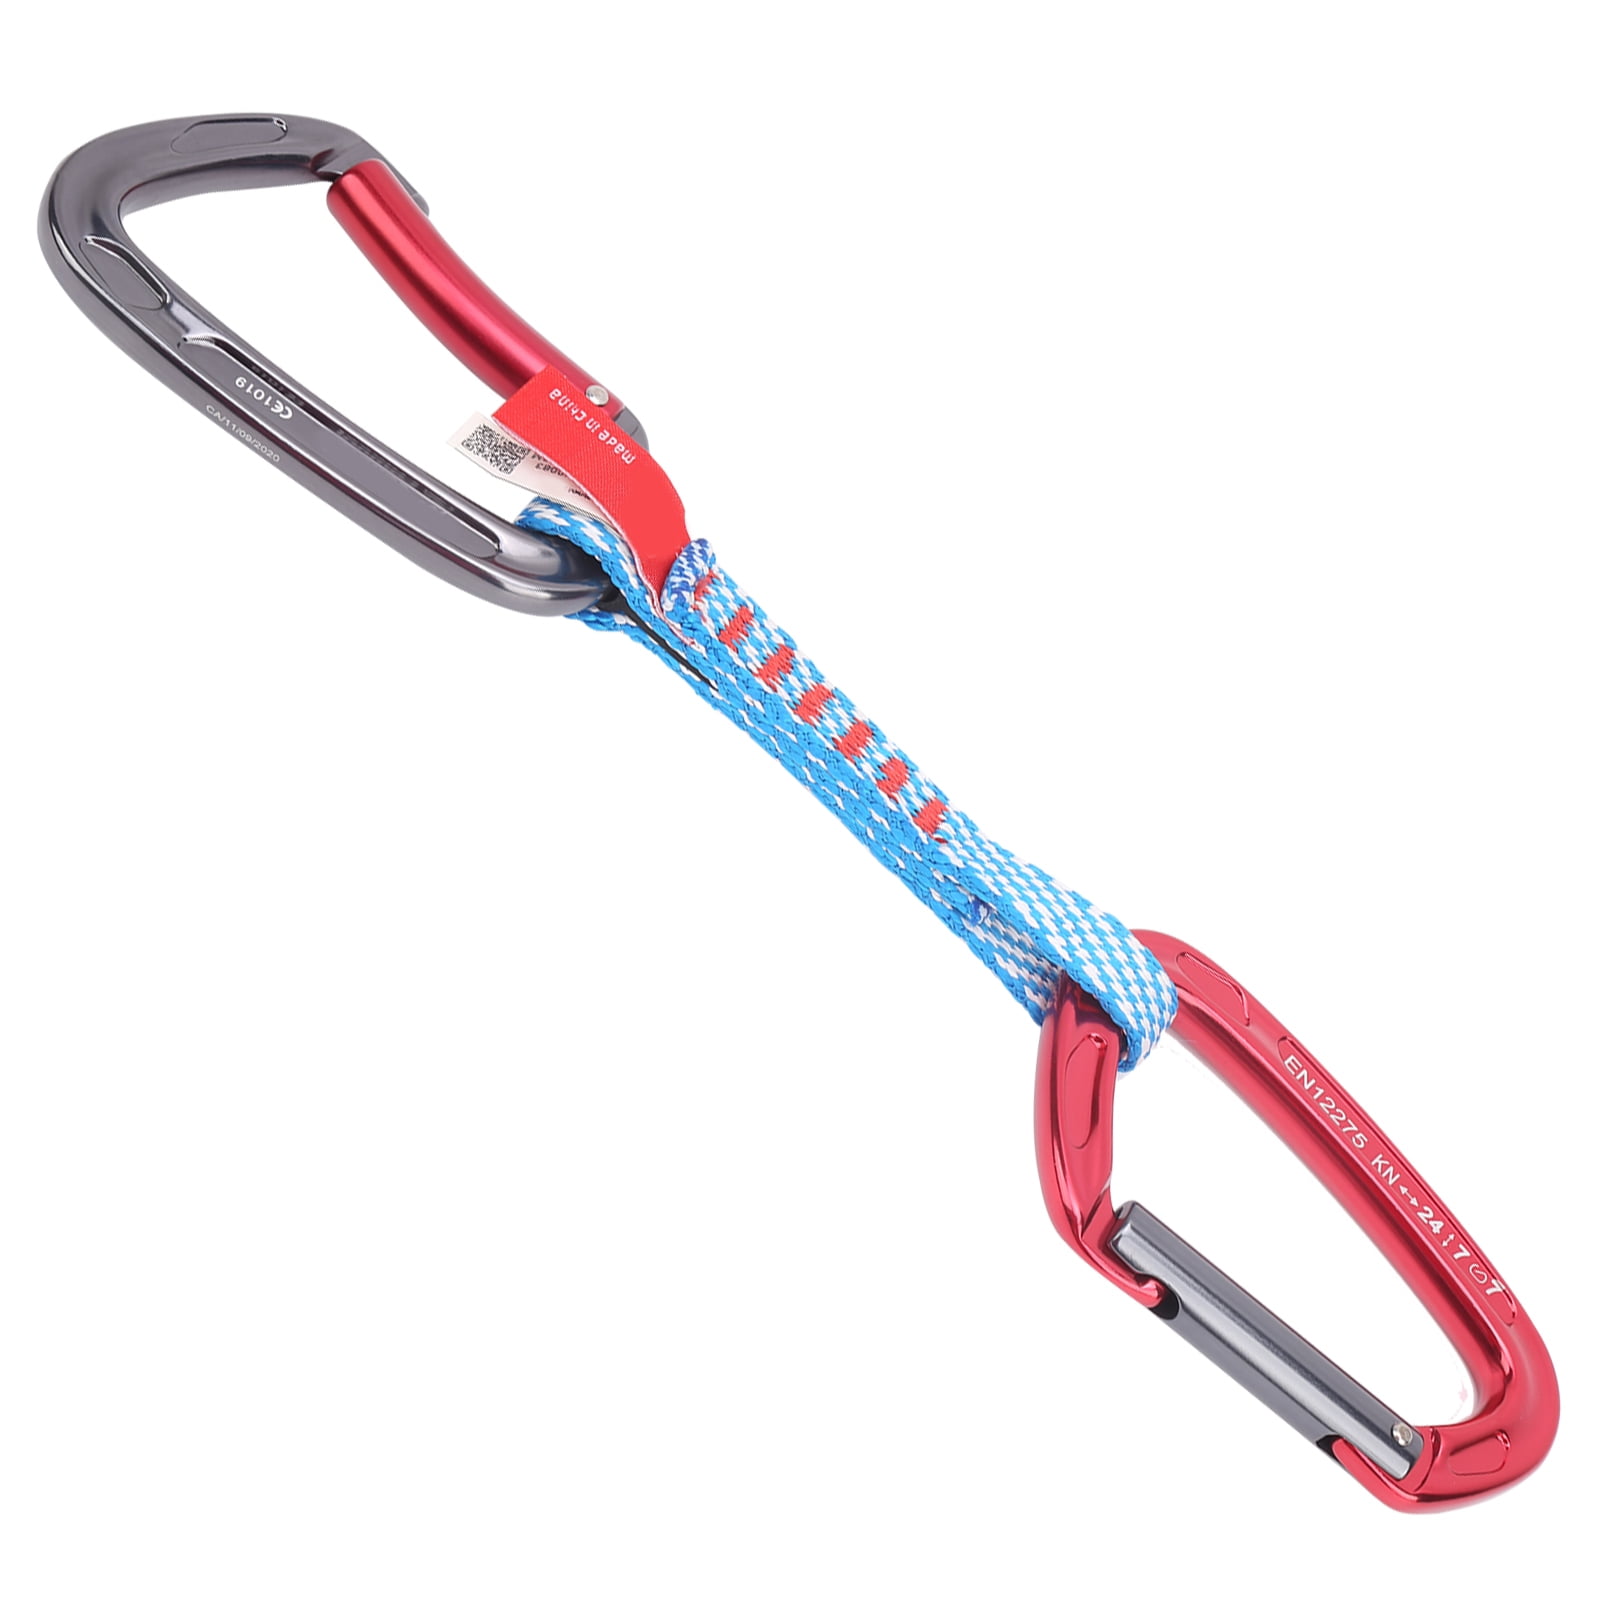 5 x 24kN Aluminum Bent Gate Carabiner for Climbing Quickdraws Ropes Slings Using 